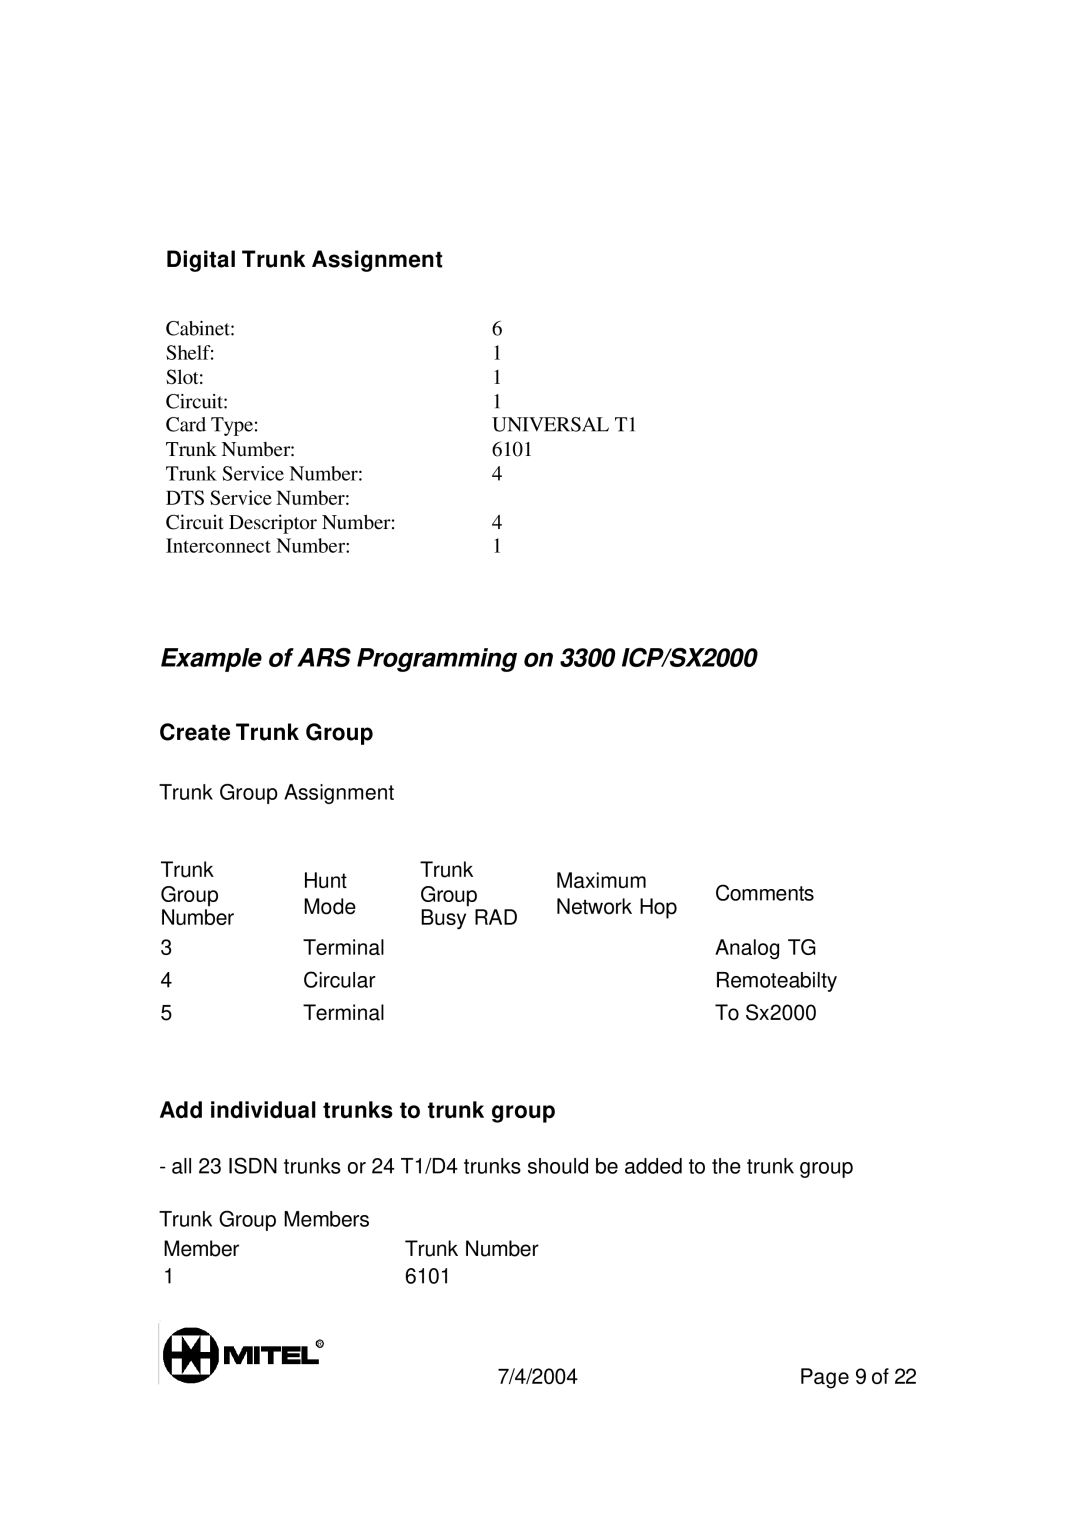 Mitel manual Example of ARS Programming on 3300 ICP/SX2000, Create Trunk Group, Add individual trunks to trunk group 